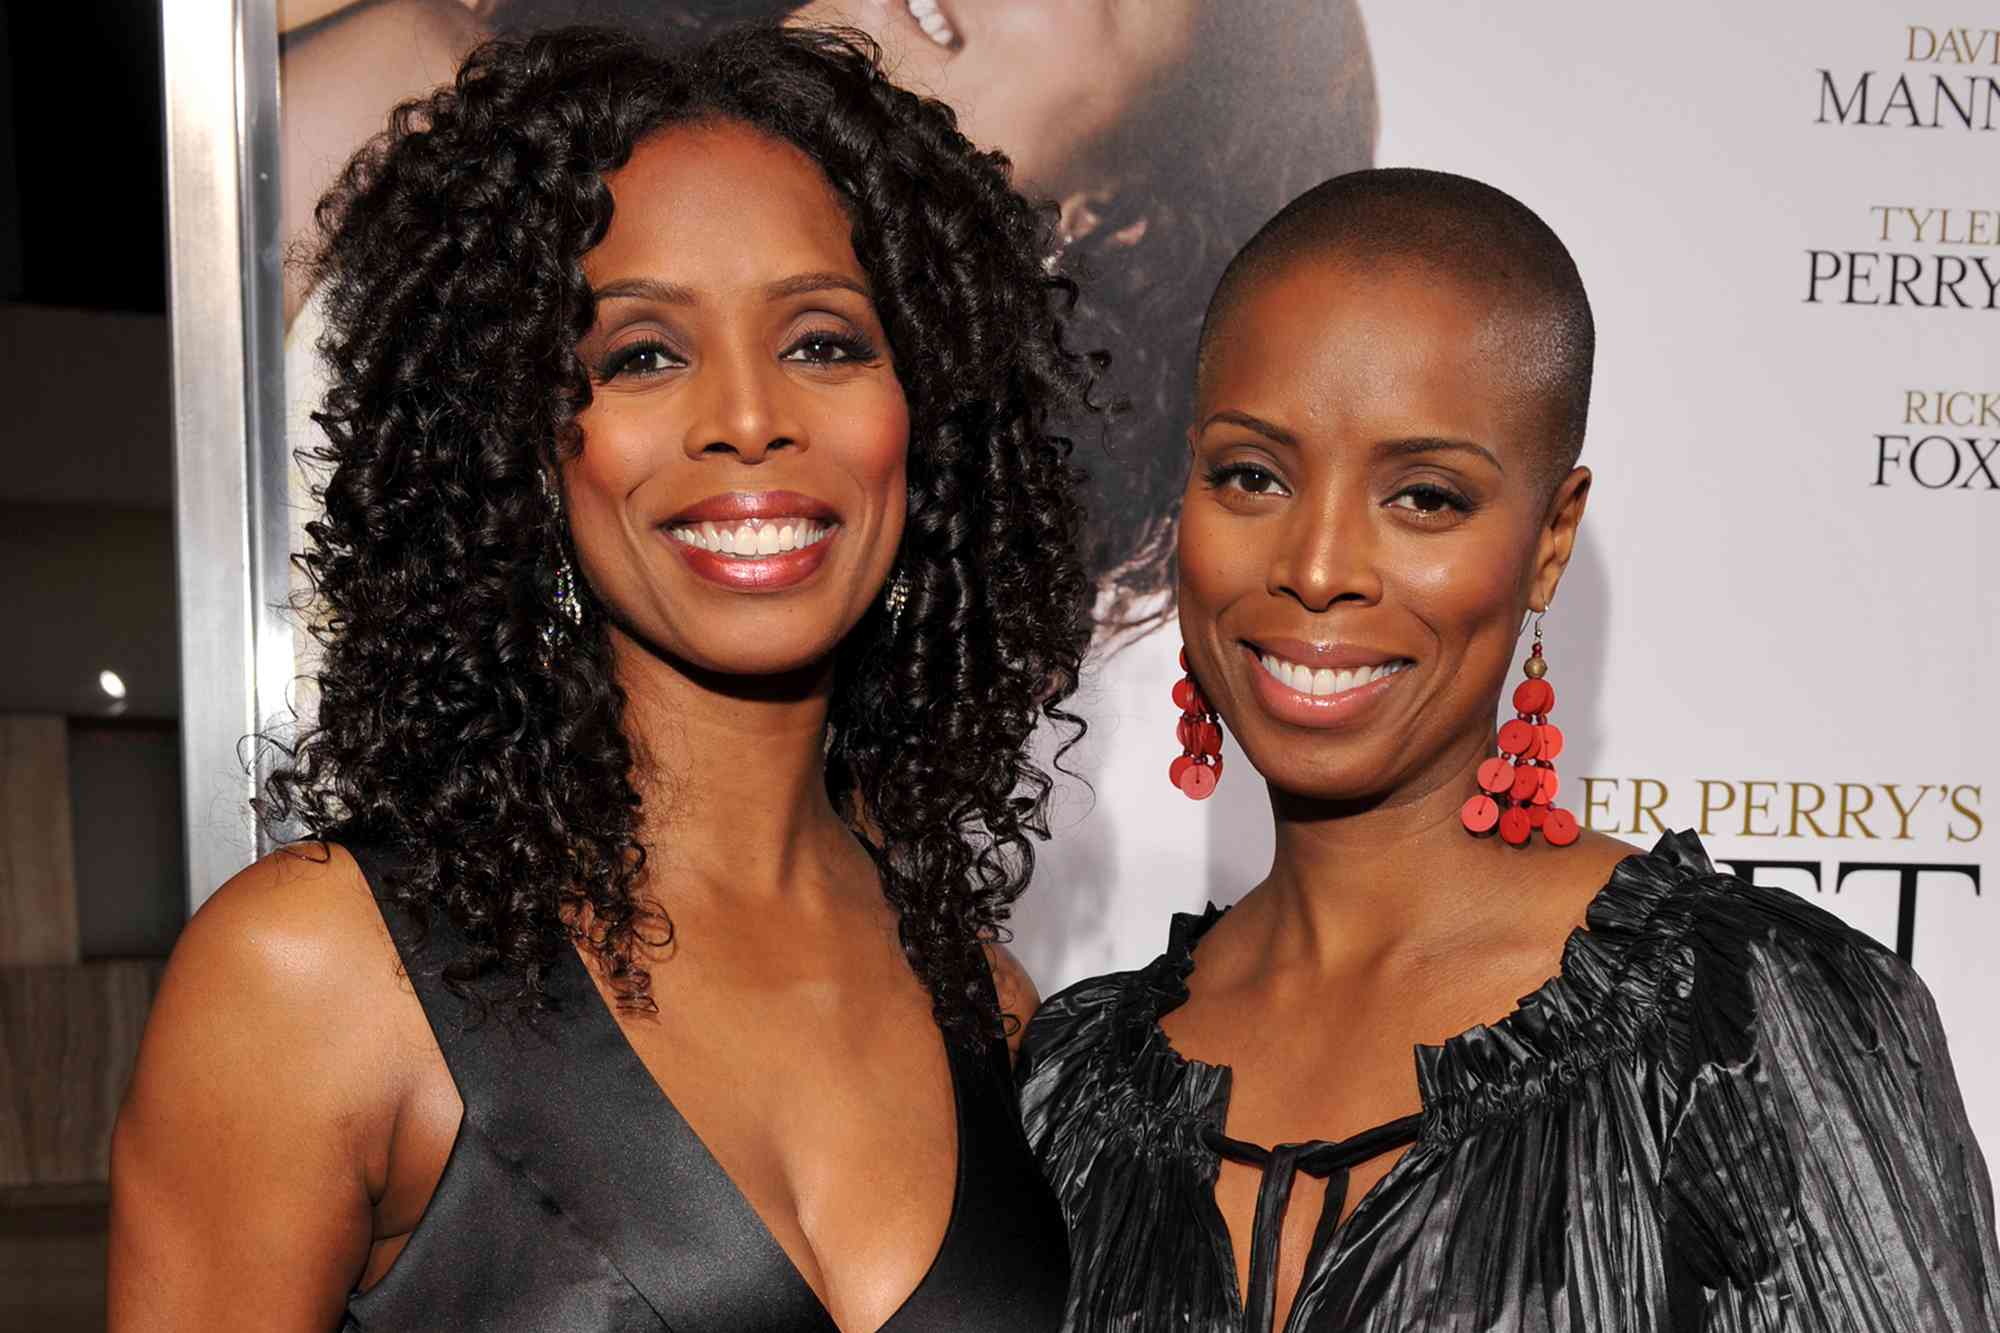 Tasha Smith and Sidra Smith: All About the Twin Actresses